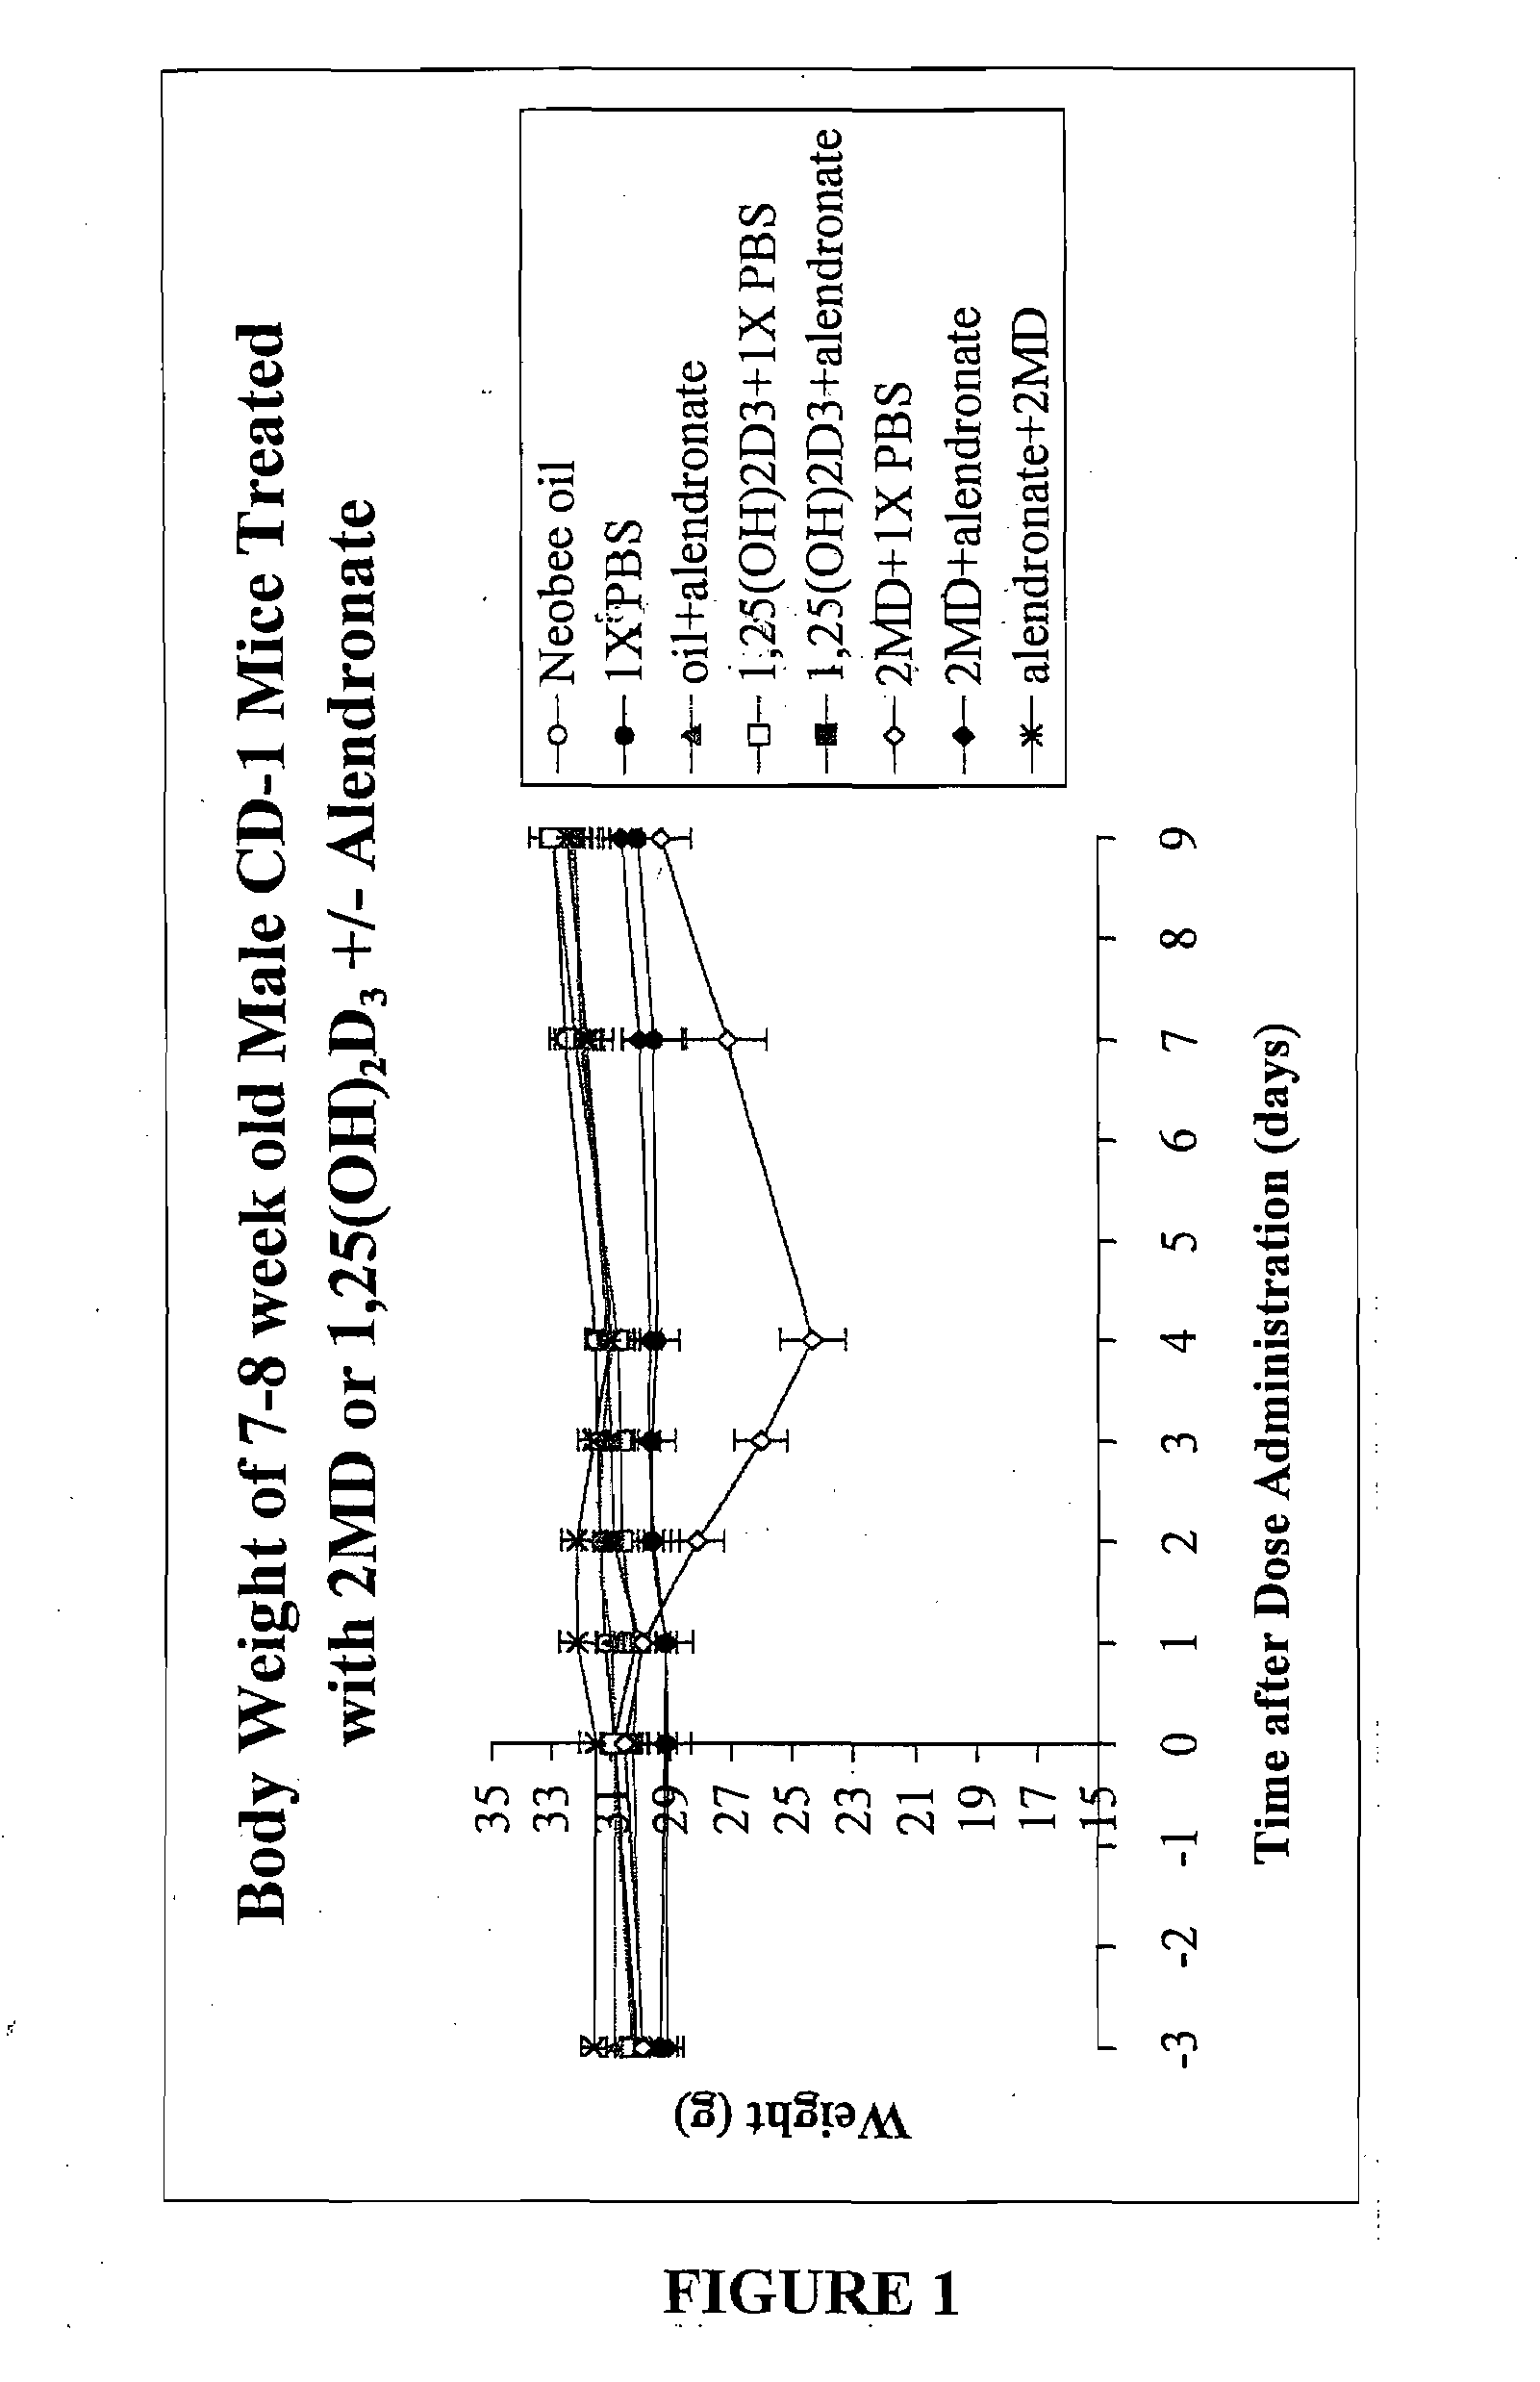 Method of Extending the Dose Range of Vitamin D Compounds